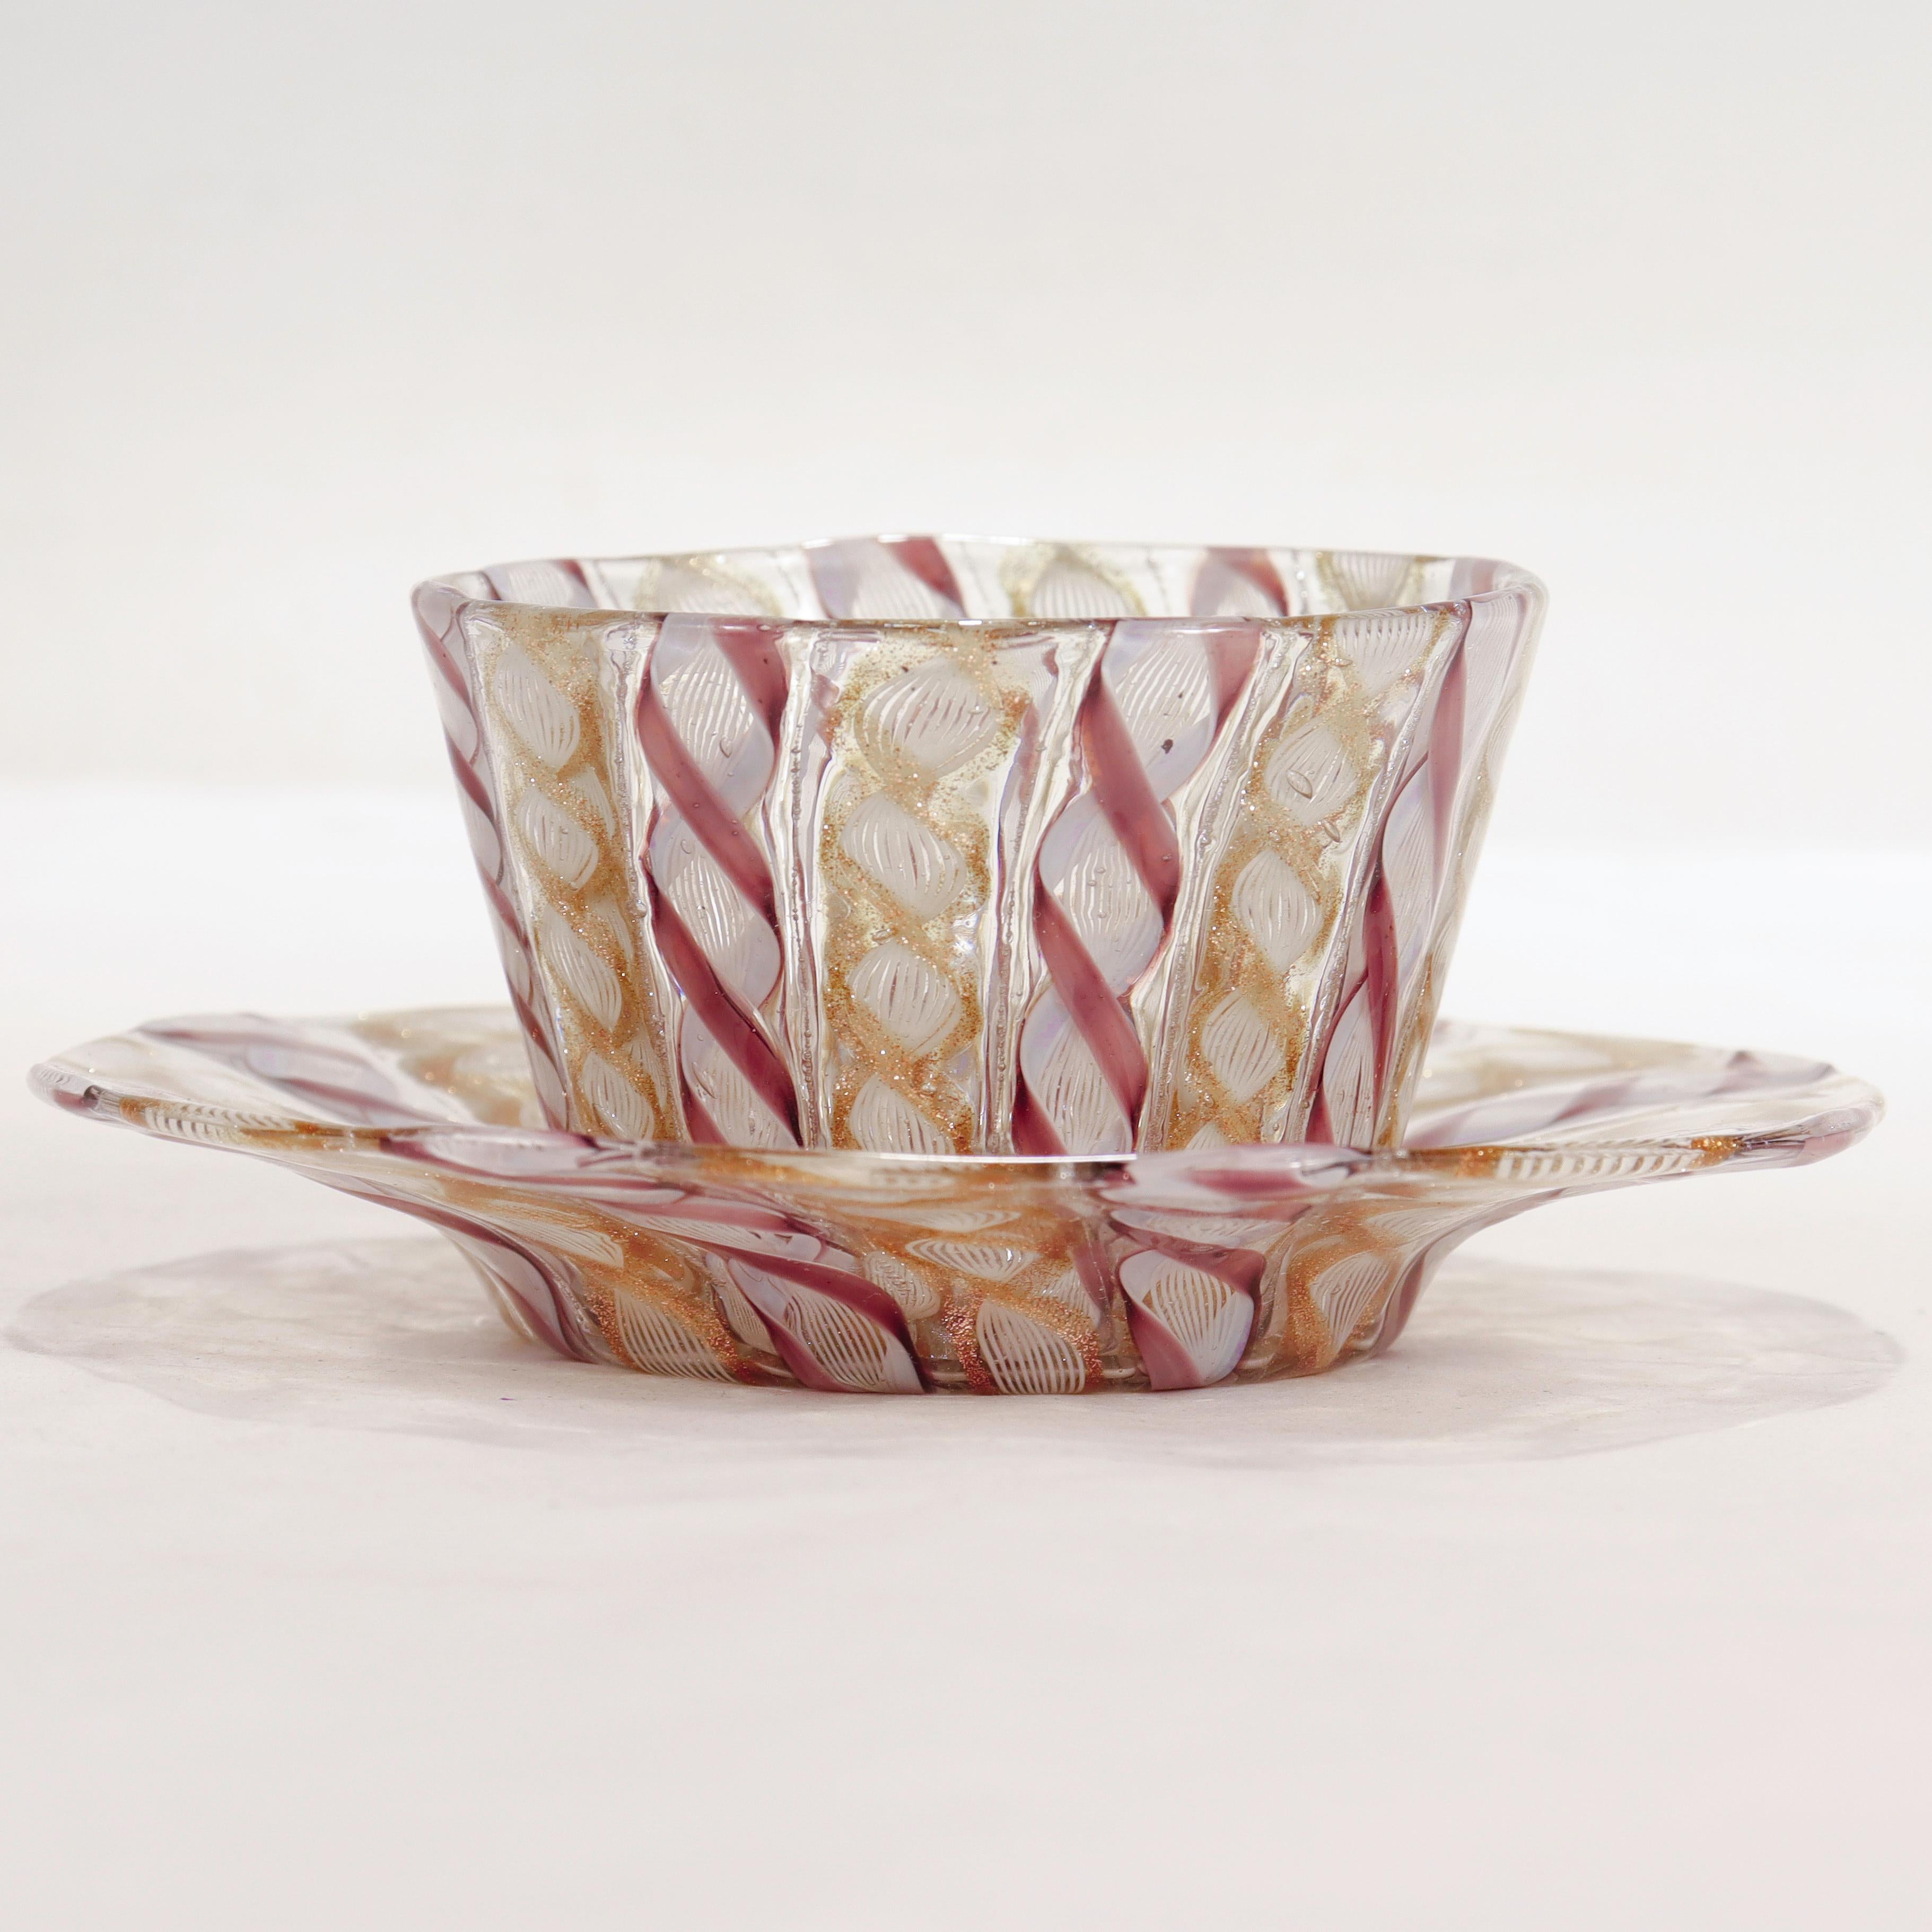 A fine vintage Italian glass finger bowl or handleless cup & saucer.

Attributed to Salviati.

Comprised of Zanfirico canes with purple, aventurine, and white threads.

Simply a wonderful Venetian glass example!

Date:
Early 20th Century

Overall